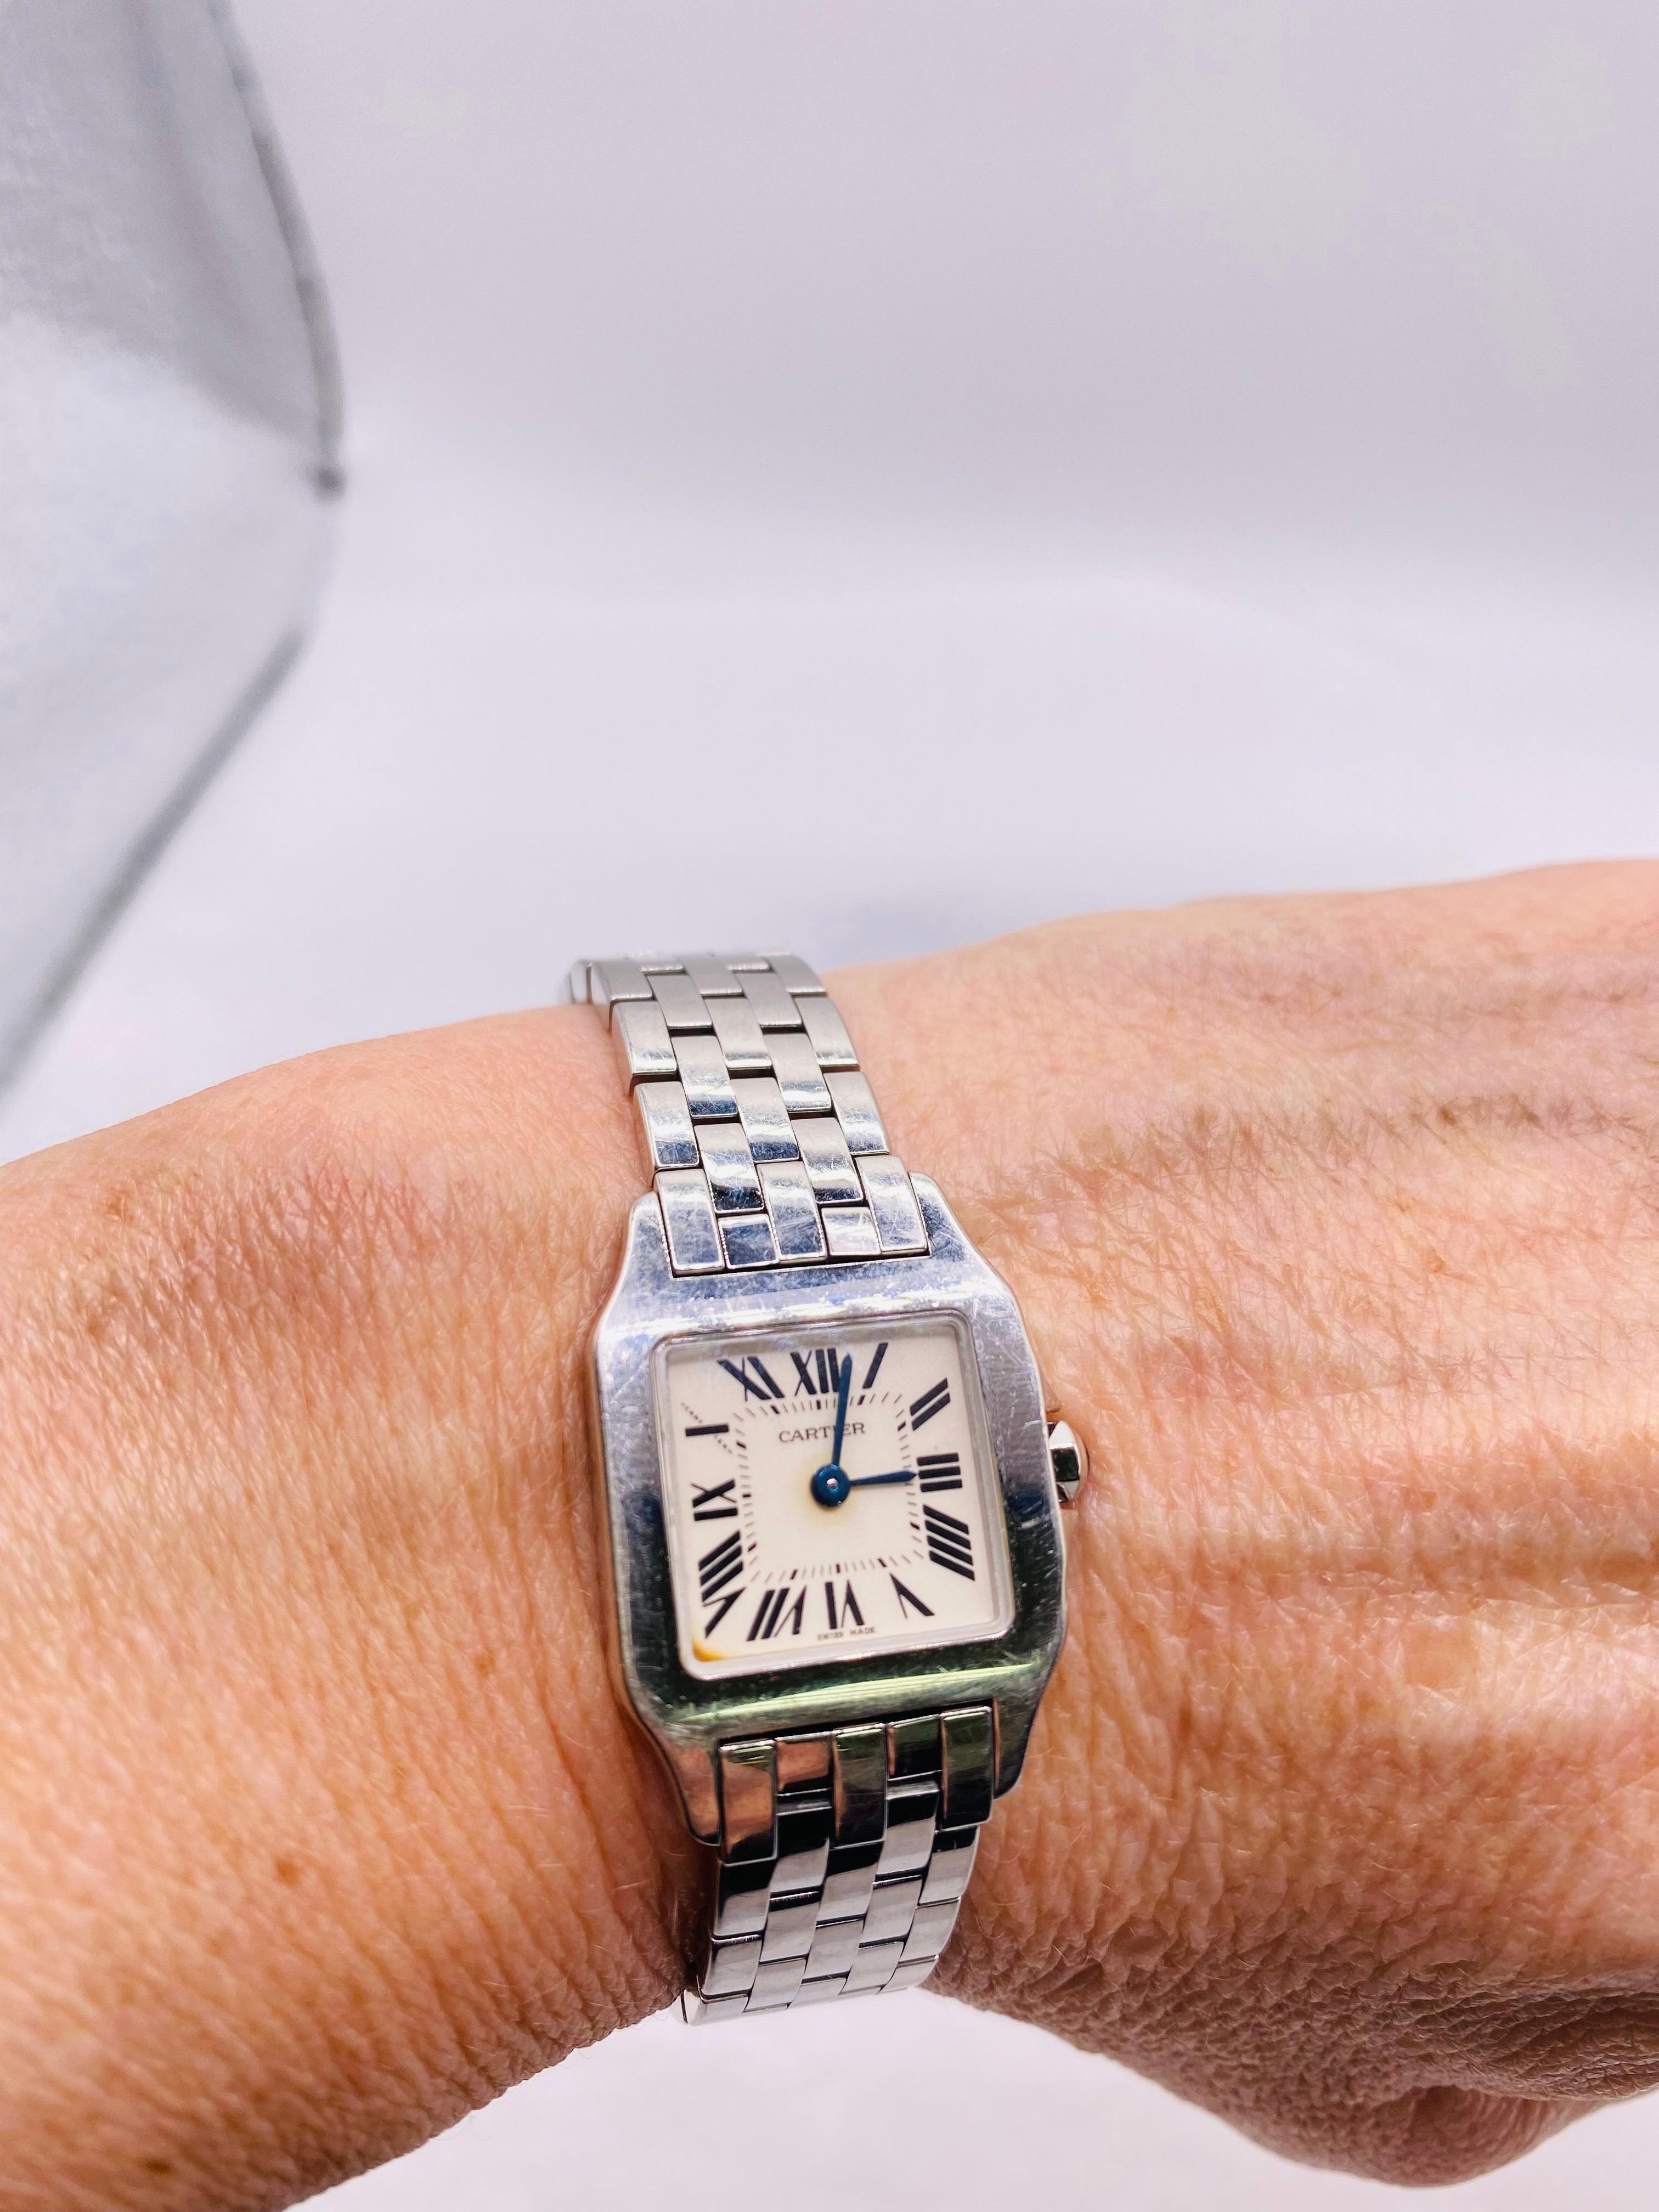 Stainless Steel Cartier Santos Demoiselle Serial: 717406lx, Model: 2698 Professionally Serviced: 8/10/21. 10mm wide band. 20x20mm square case.